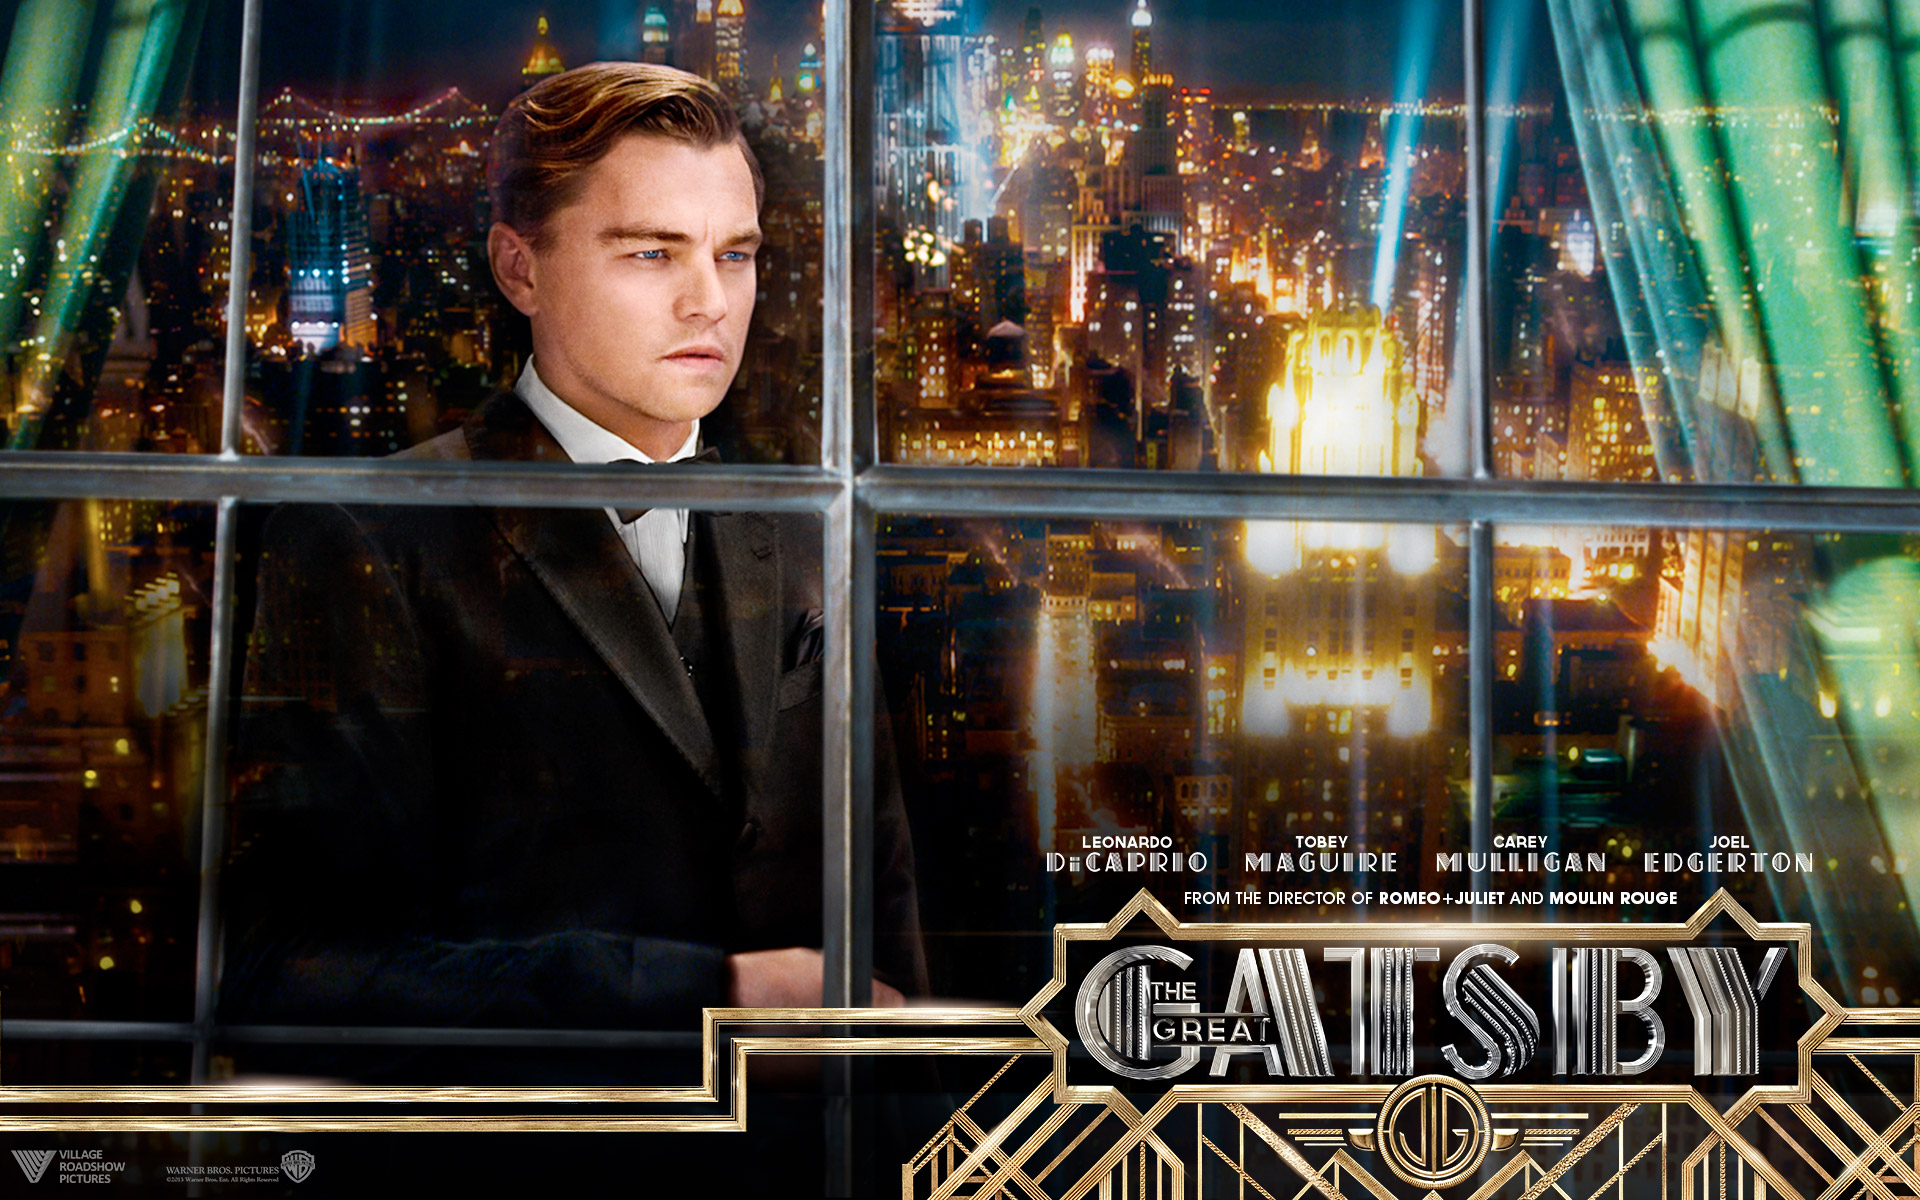 Download HQ The Great Gatsby wallpaper / Movies / 1920x1200